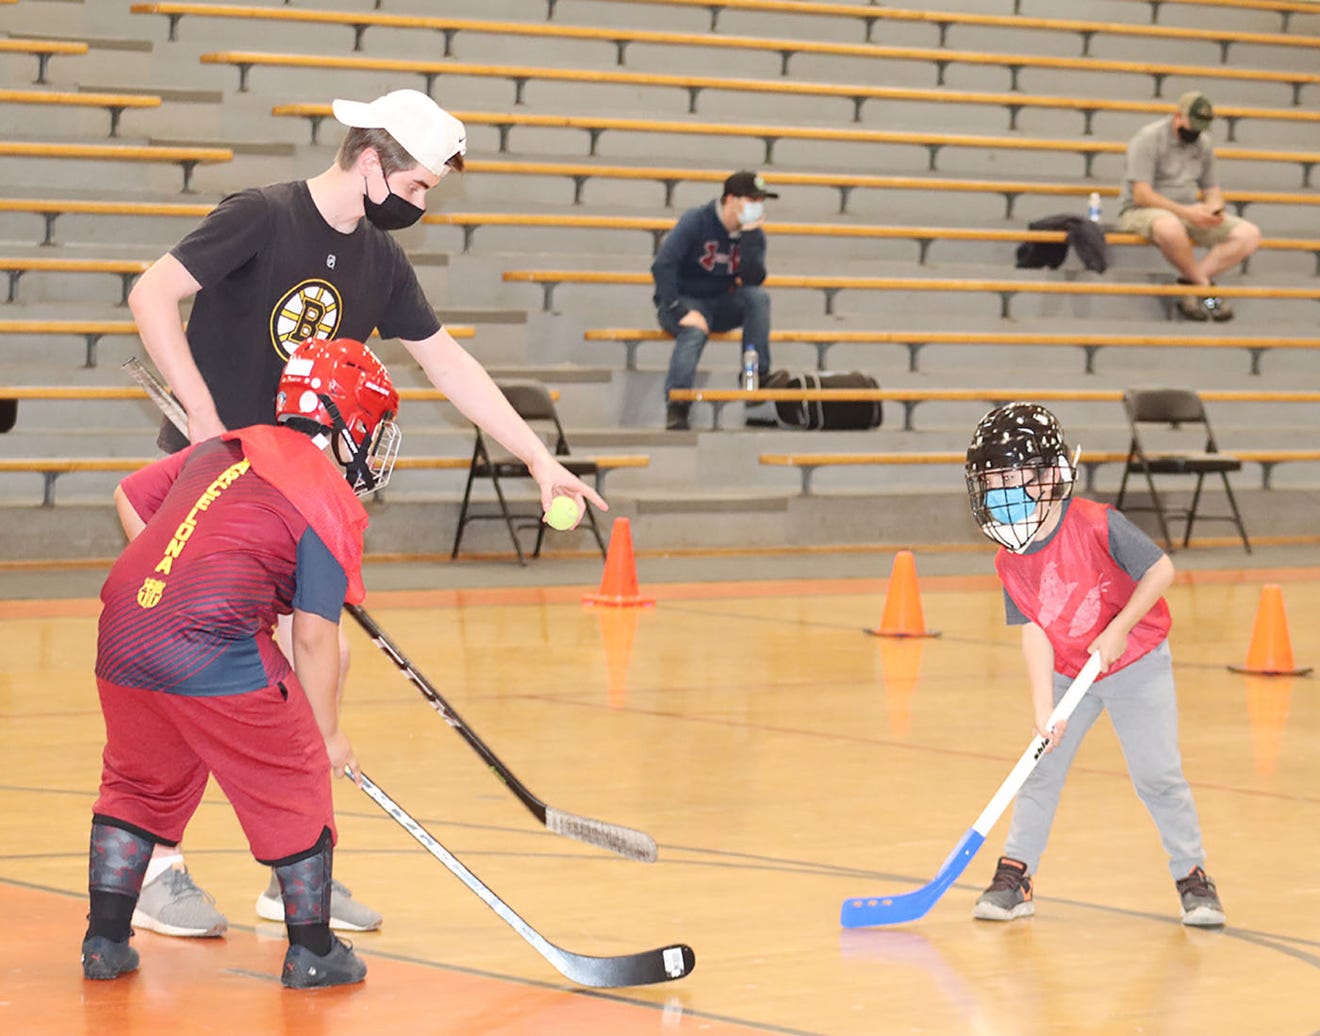 Gardner Rec. Department's floor hockey clinic scores with city's youth